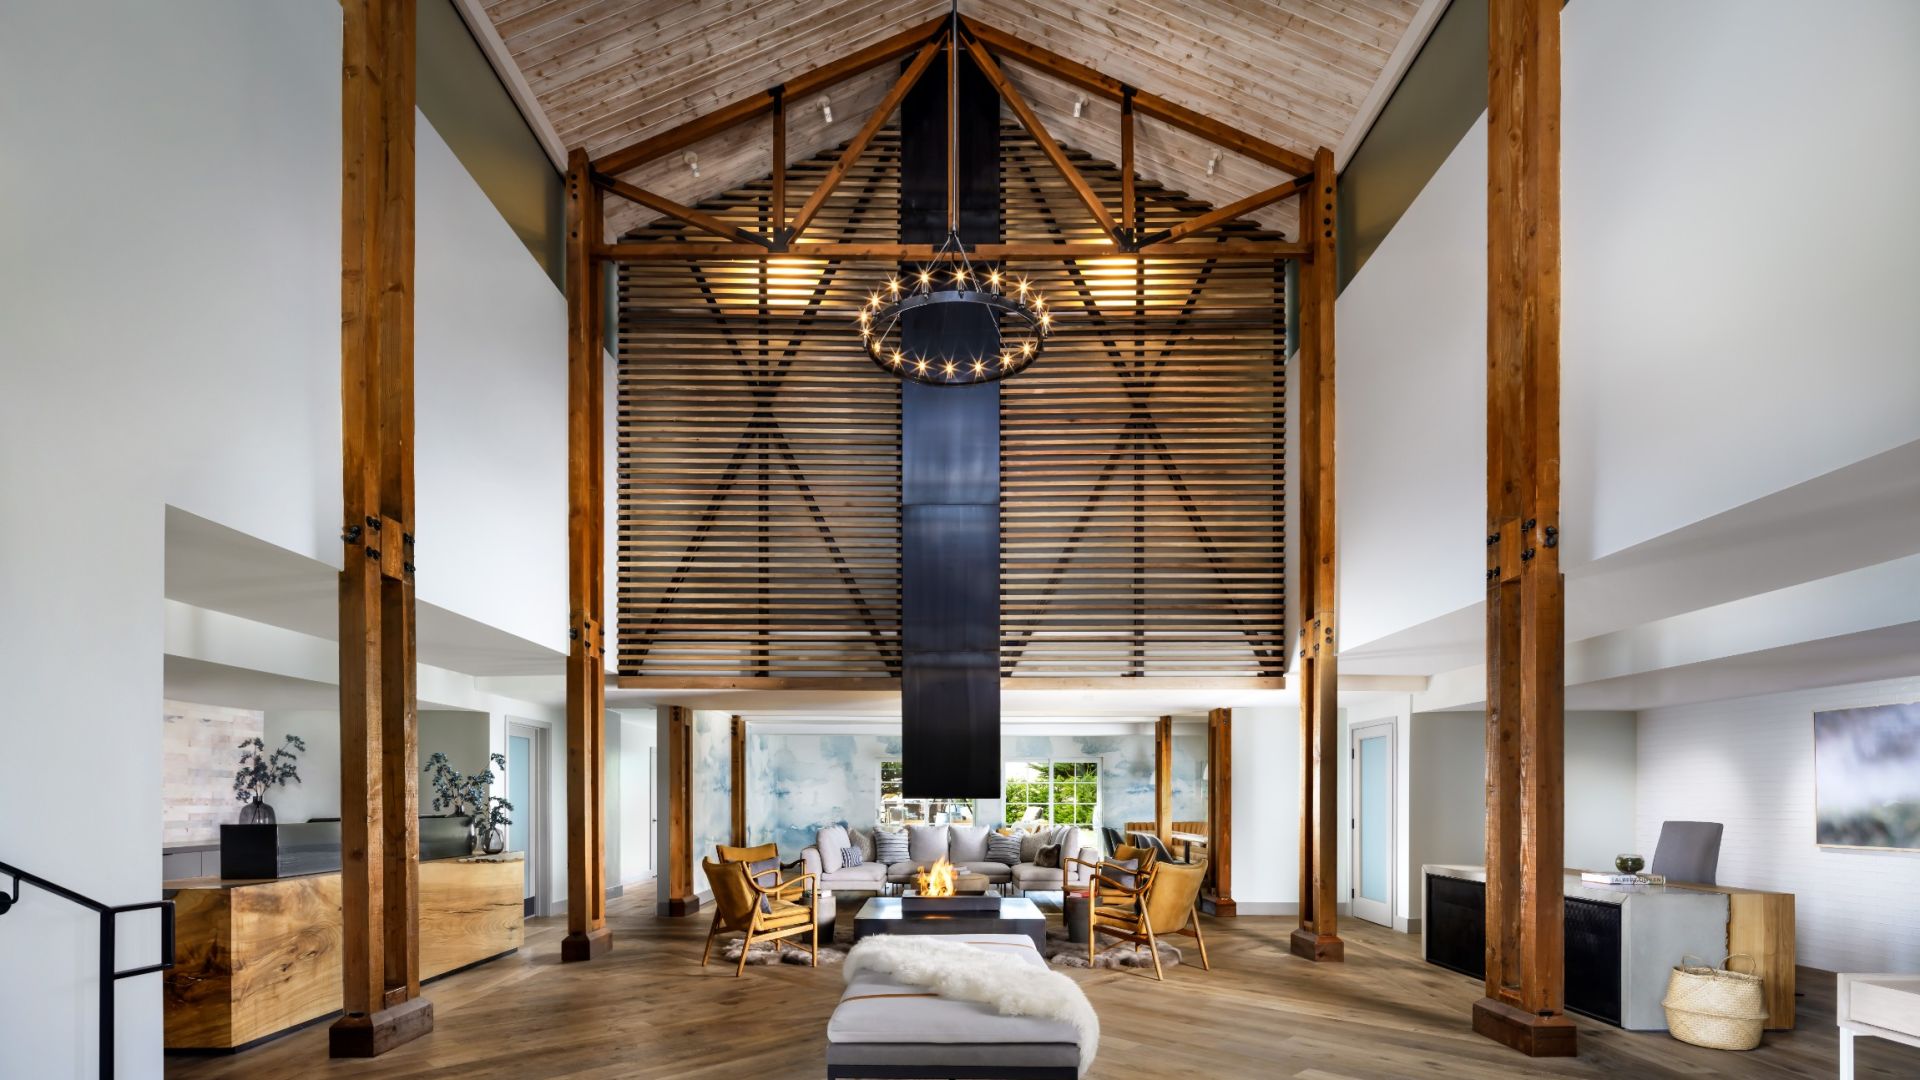 A Room With A Wood Ceiling And A Wood Ceiling